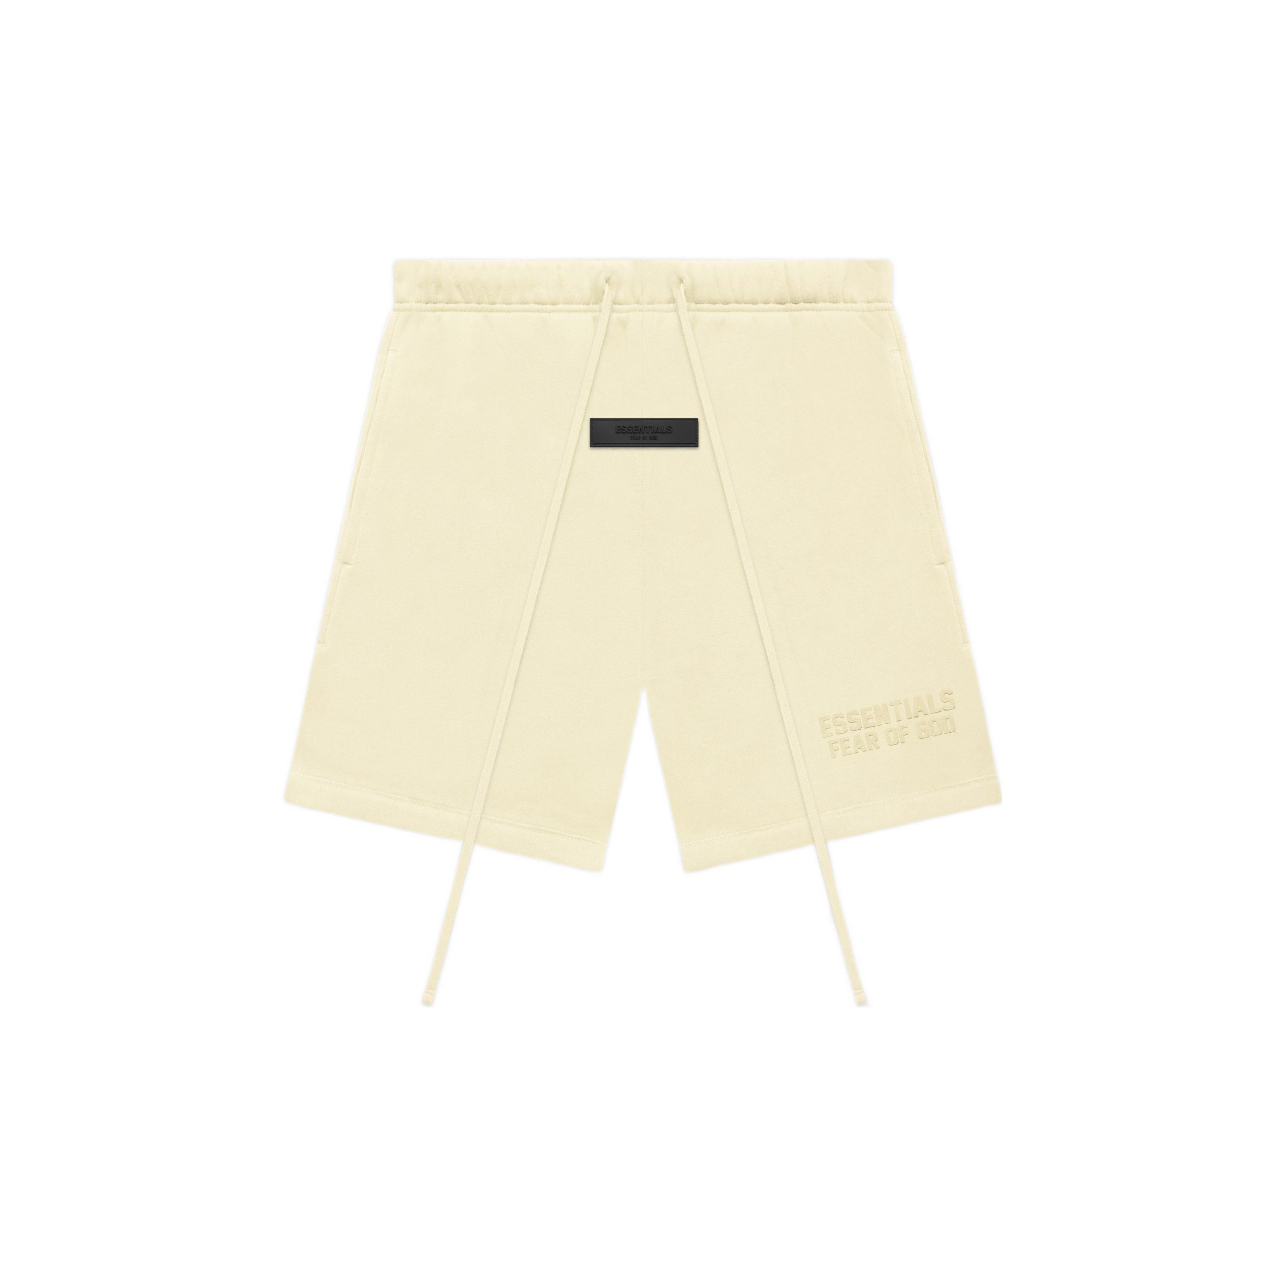 Essential Fear of God SS23 Canary Short